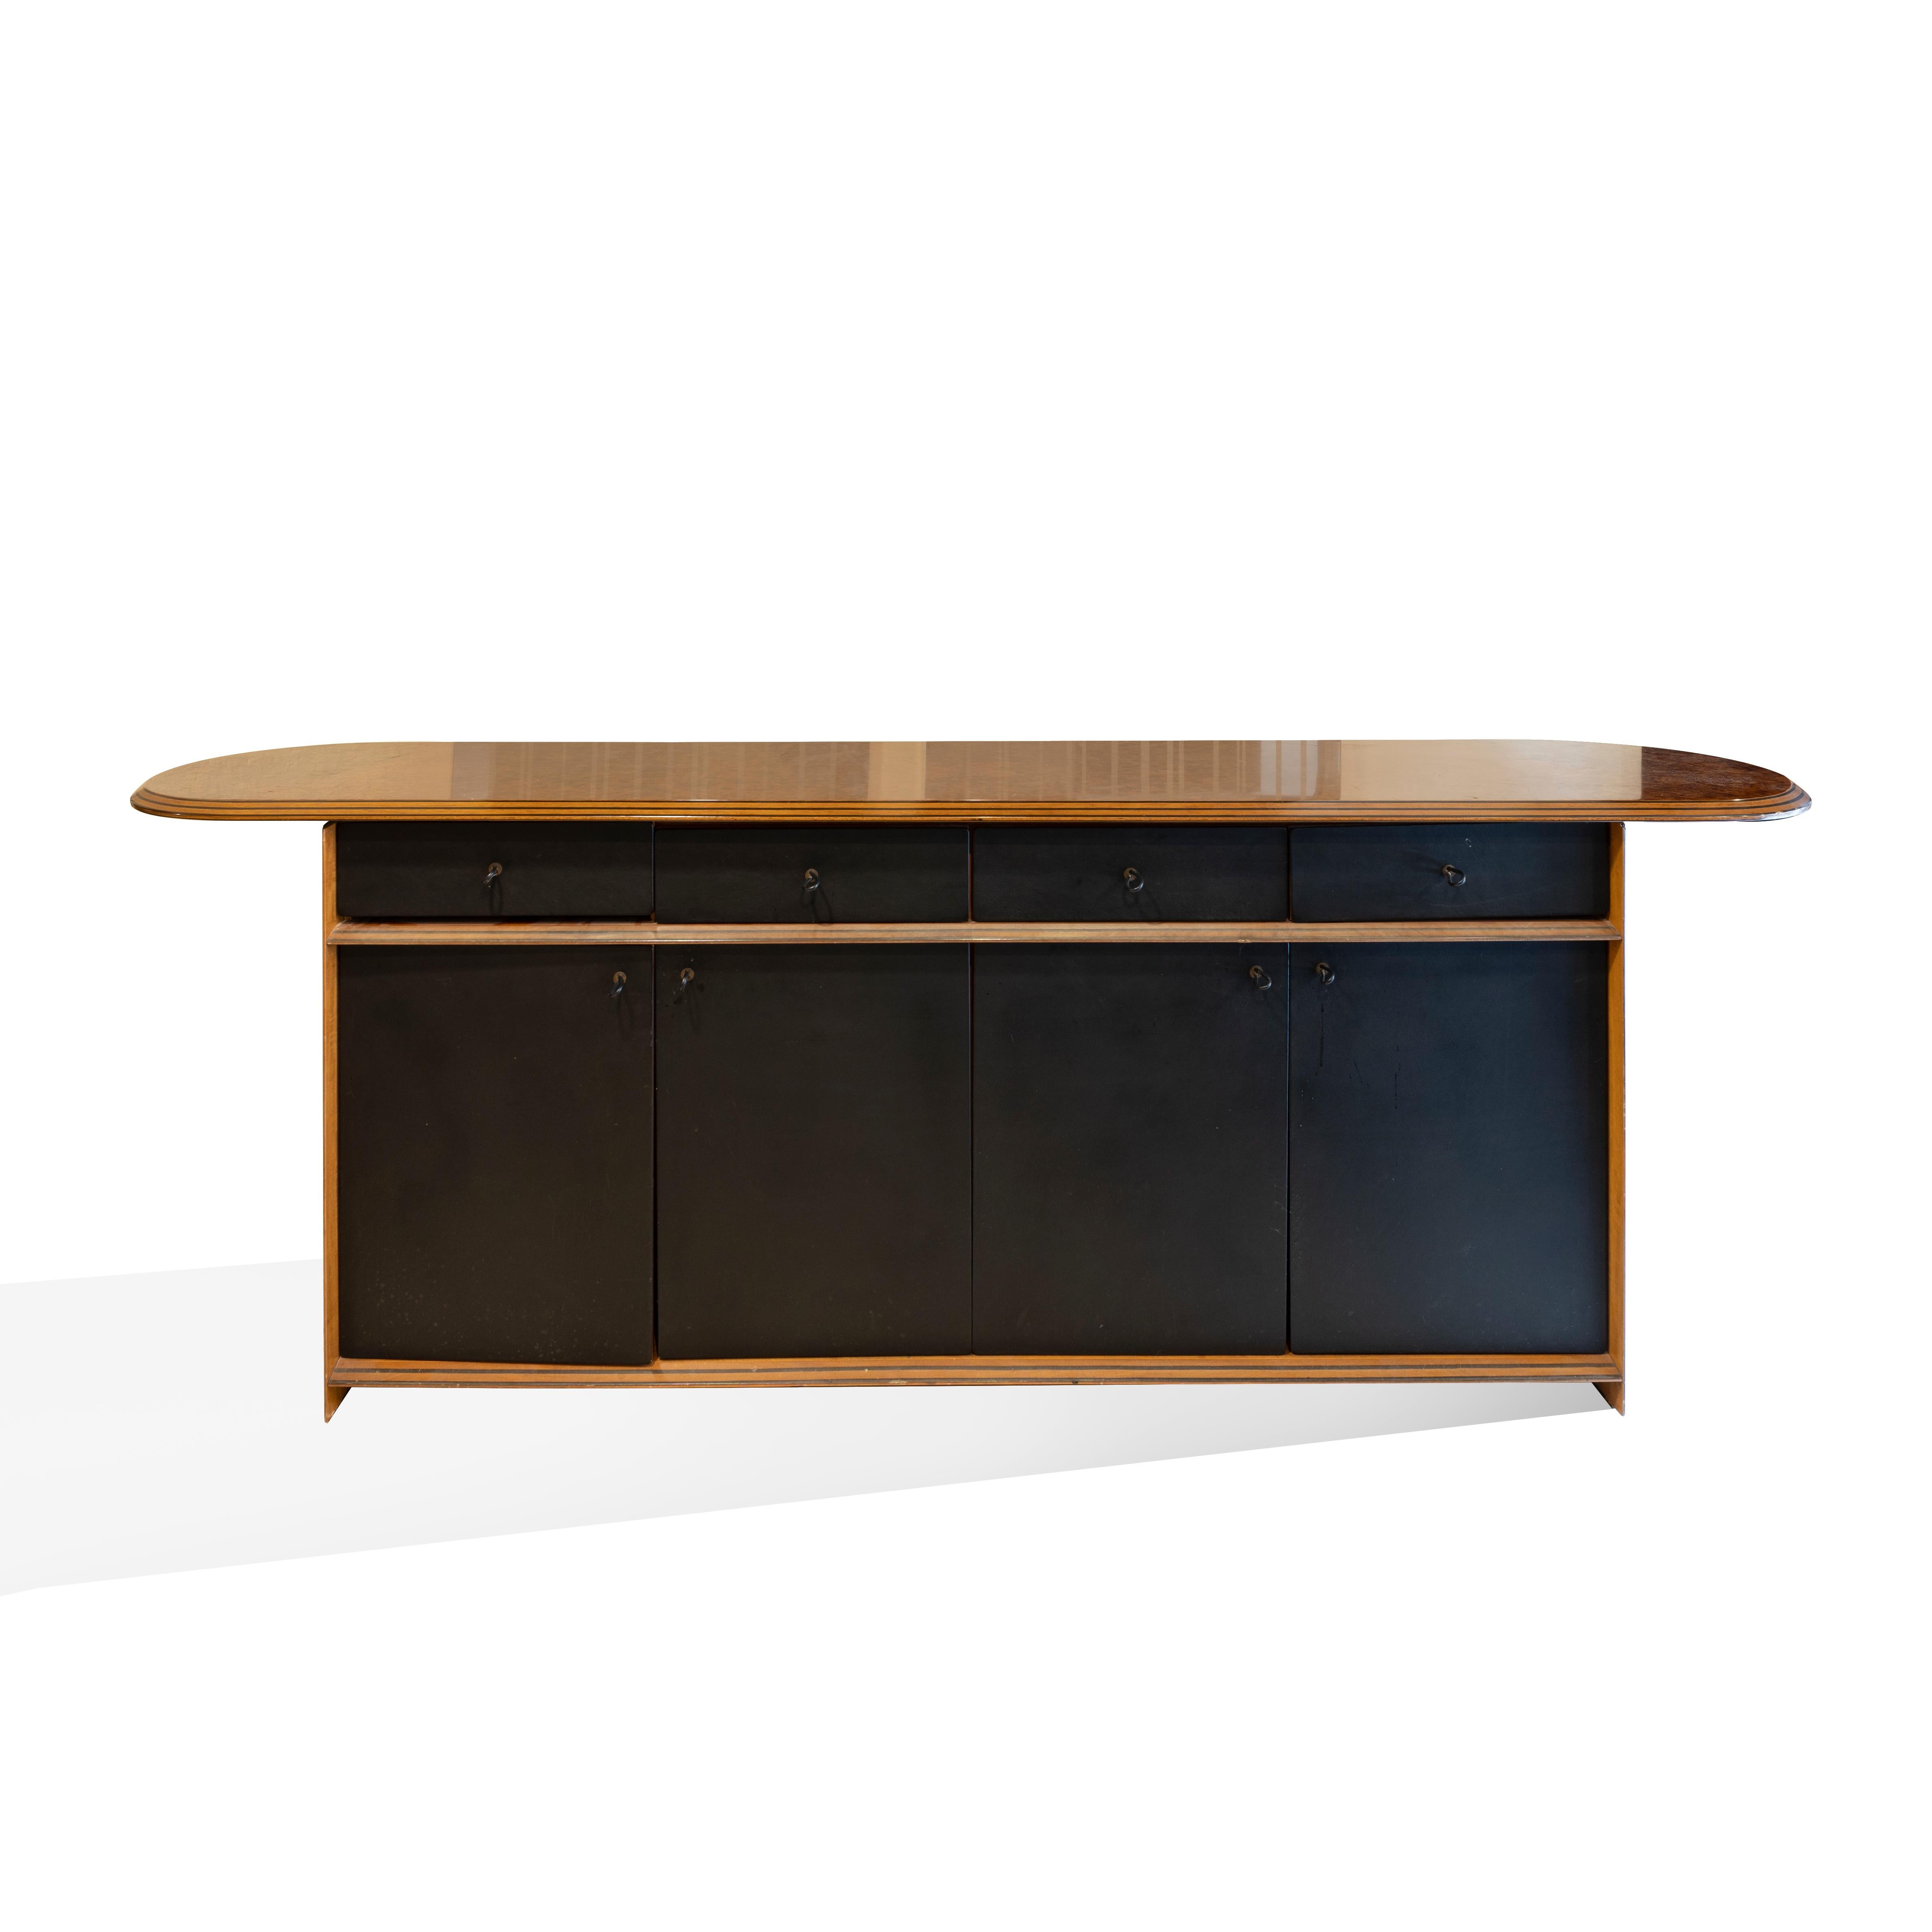 Afra e Tobia Scarpa Africa serie Artona Maxalto black leather and special wood sideboard Afra &Tobia Scarpa the duo of architectat and design the beginning of 70s, where the most used material is plastic, go against the tide and invent a new line of